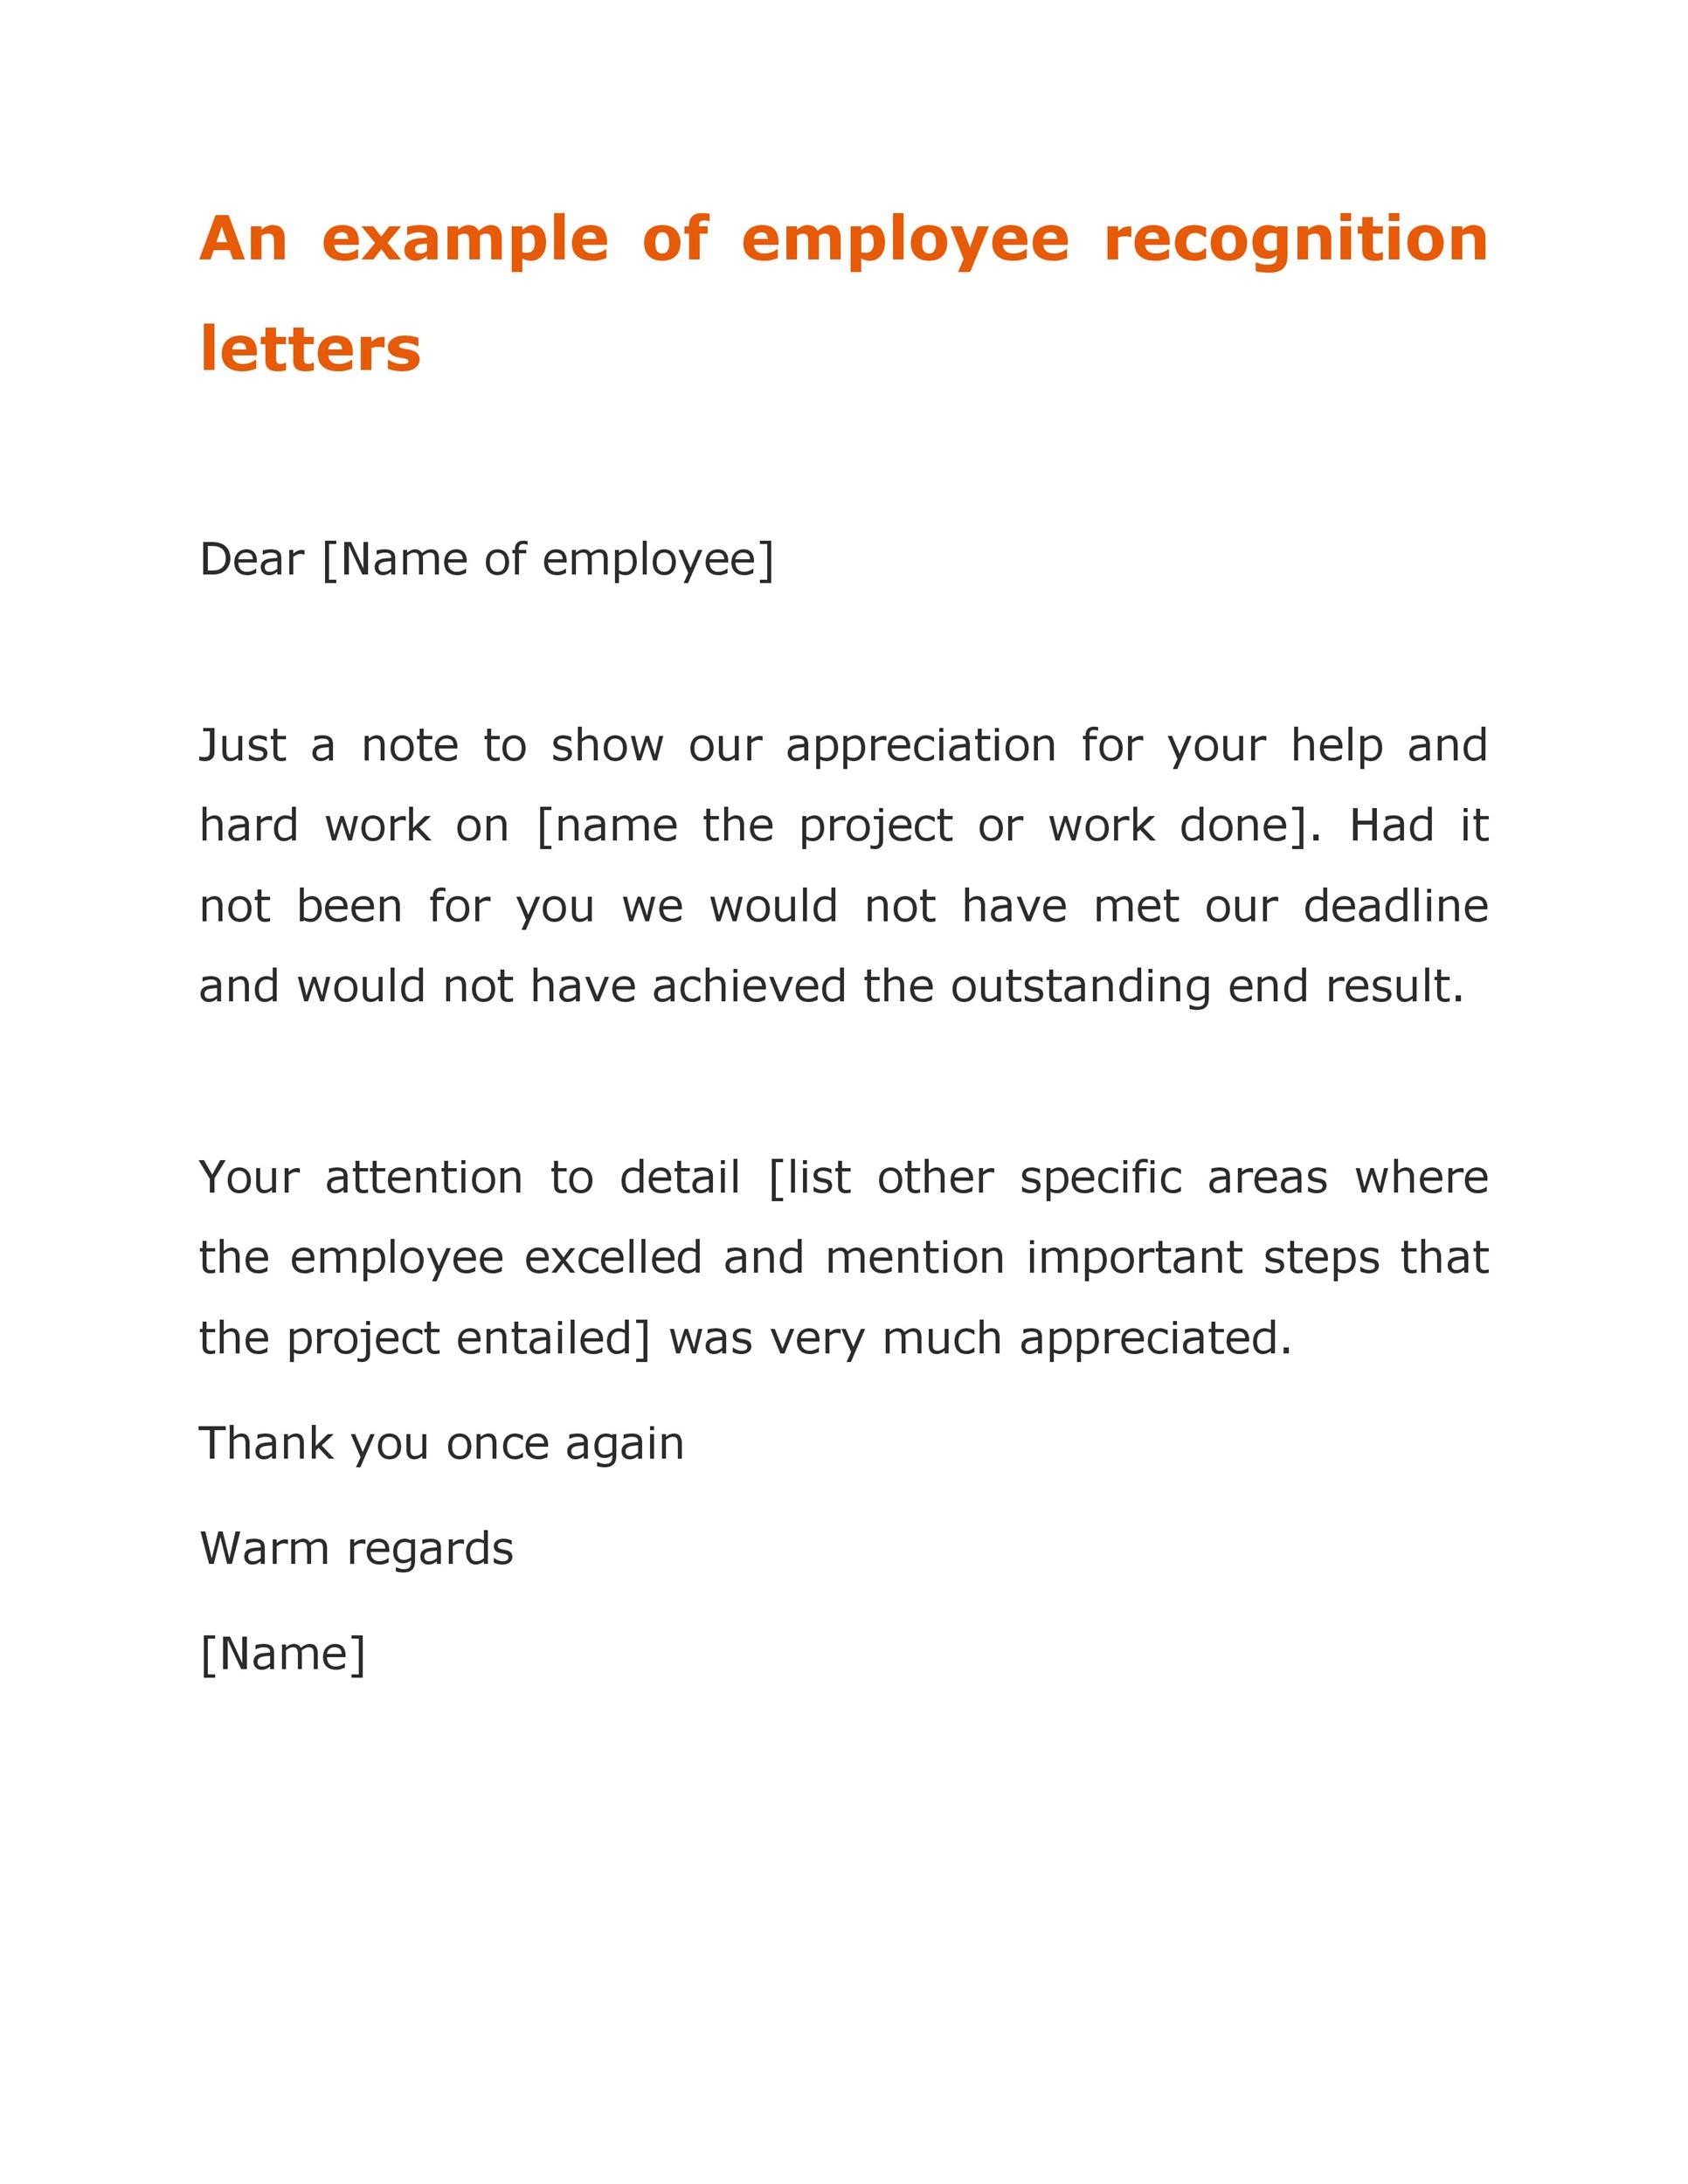 49 Printable Employee Recognition Letters (100 FREE) ᐅ TemplateLab